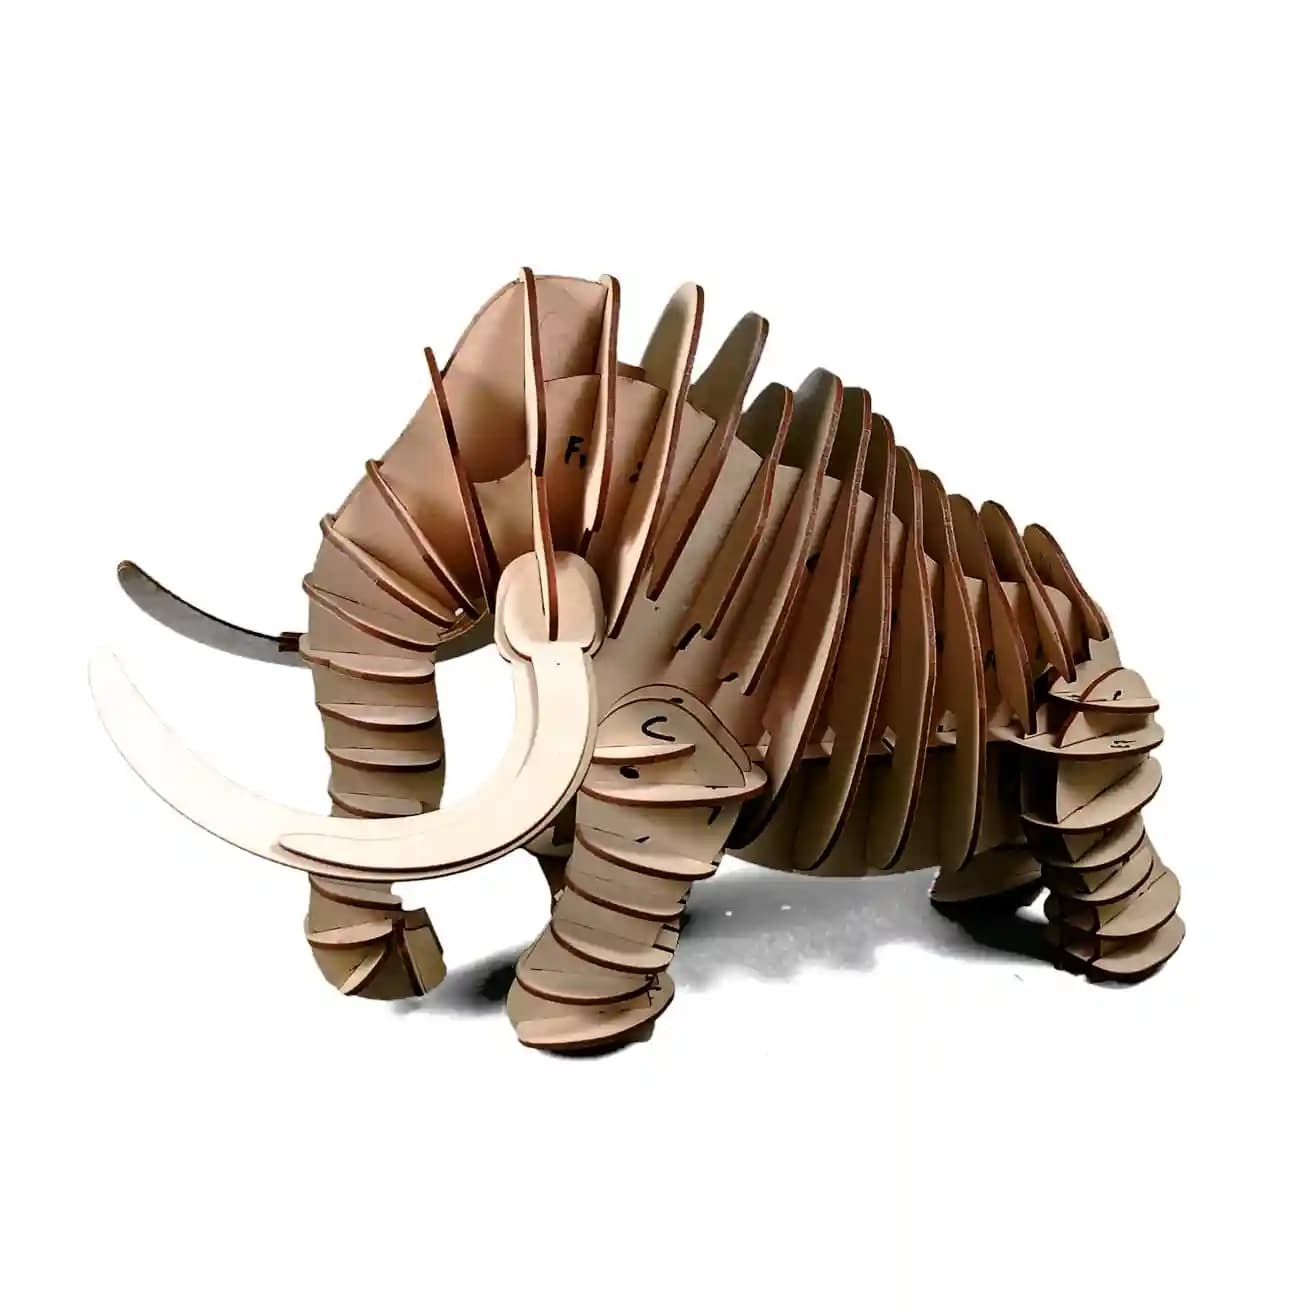 3D Model of Mammoth in Form of Puzzle DIY KIT